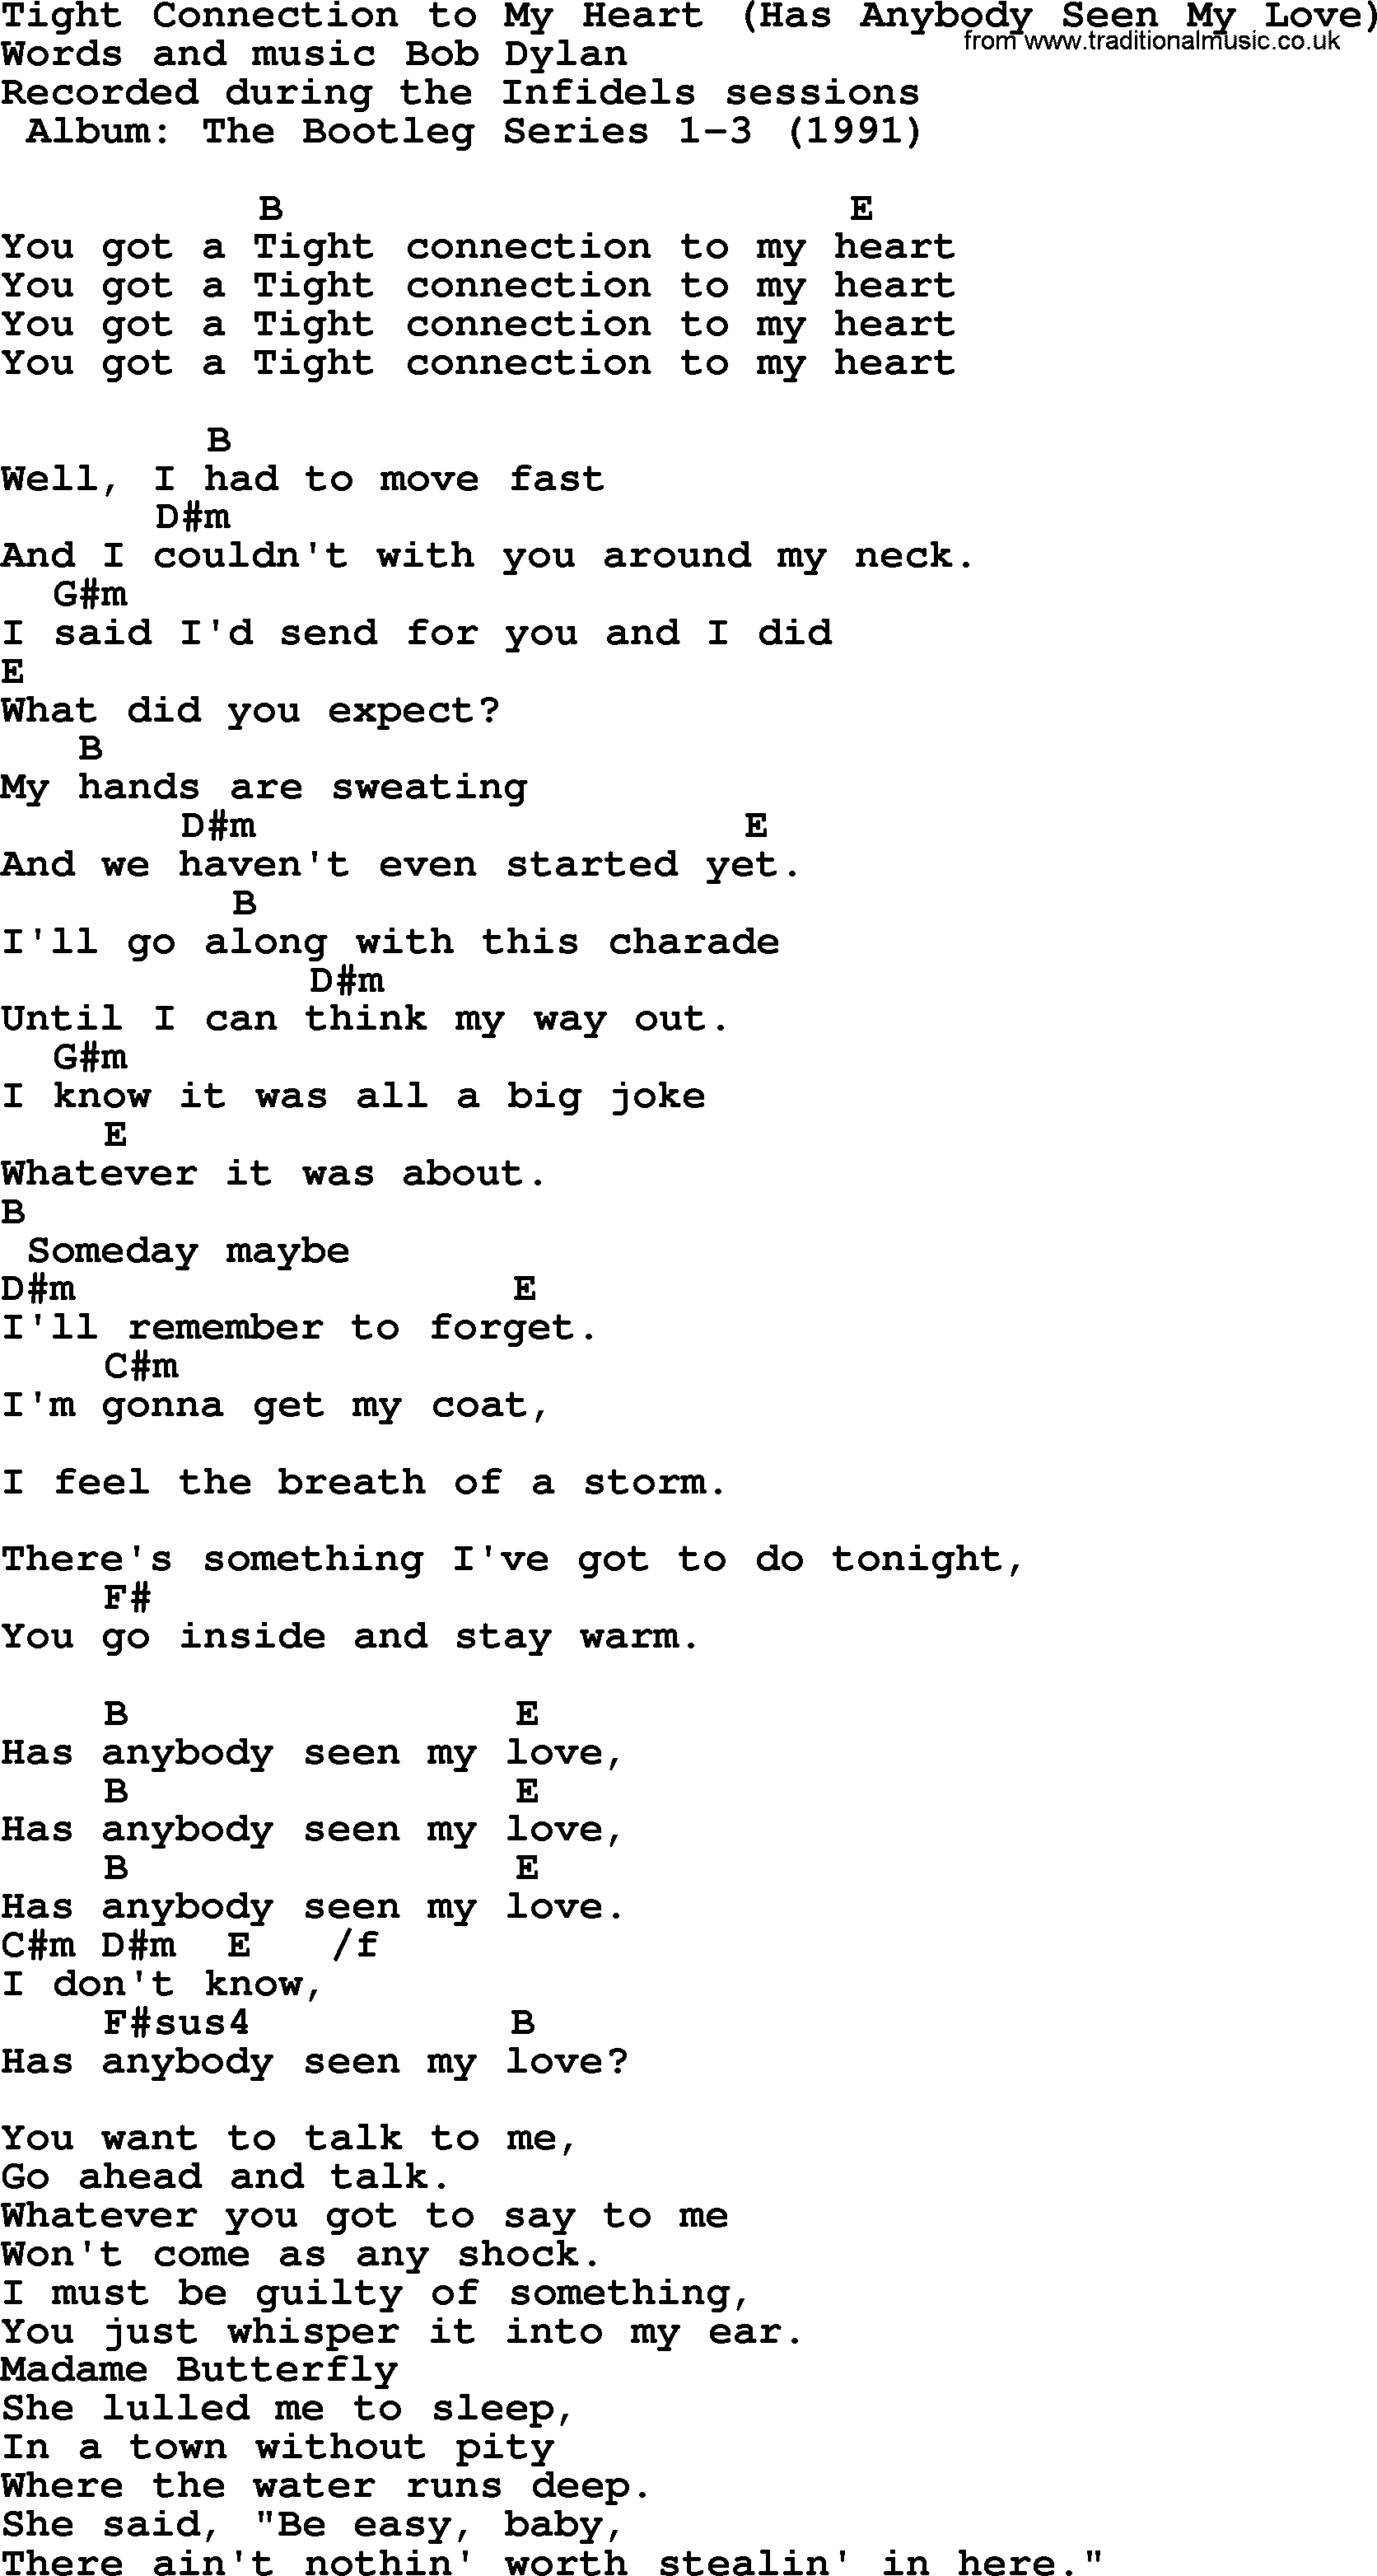 Bob Dylan song, lyrics with chords - Tight Connection to My Heart (Has Anybody Seen My Love)